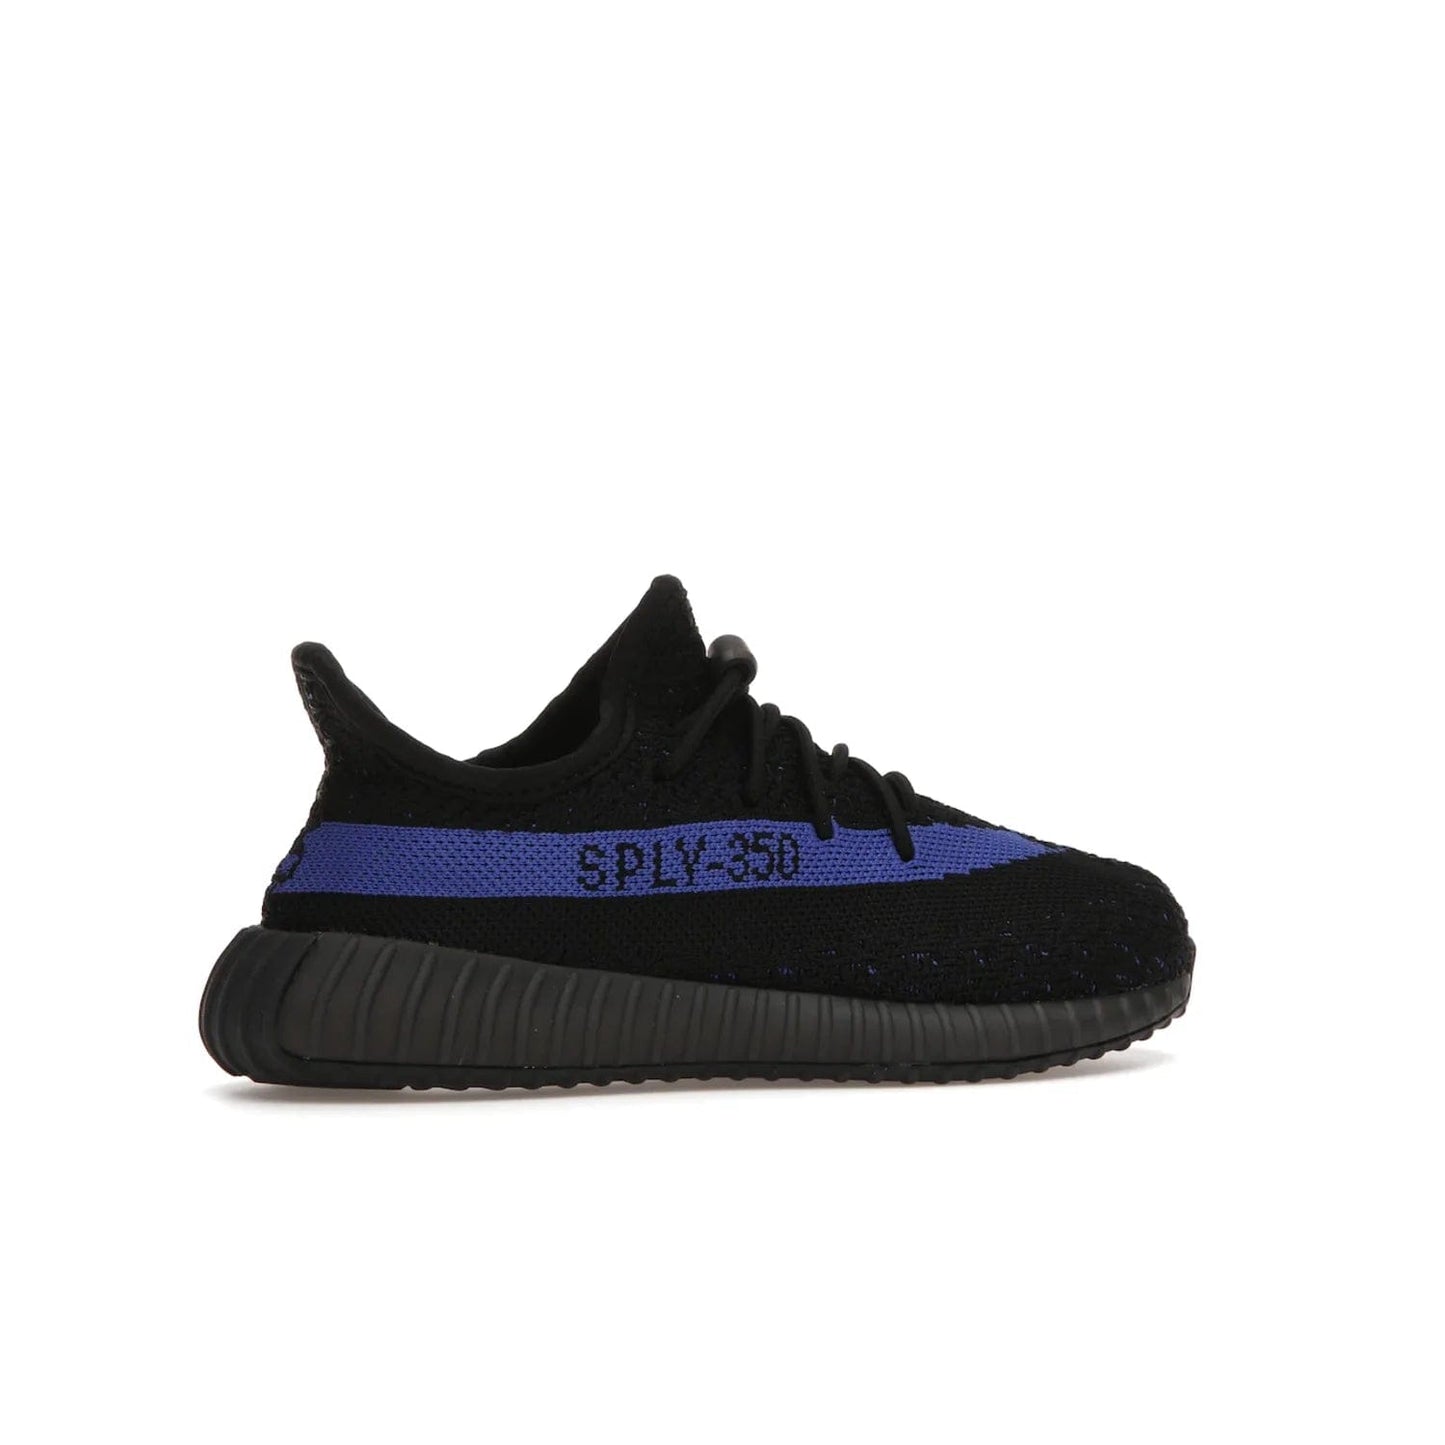 adidas Yeezy Boost 350 V2 Dazzling Blue (Kids) - Image 35 - Only at www.BallersClubKickz.com - Shop the adidas Yeezy Boost 350 V2 Dazzling Blue (Kids). Features a black Primeknit upper with a royal blue 'SPLY-350' streak and a full-length Boost midsole. Durable rubber outsole provides plenty of traction. Available for $160.